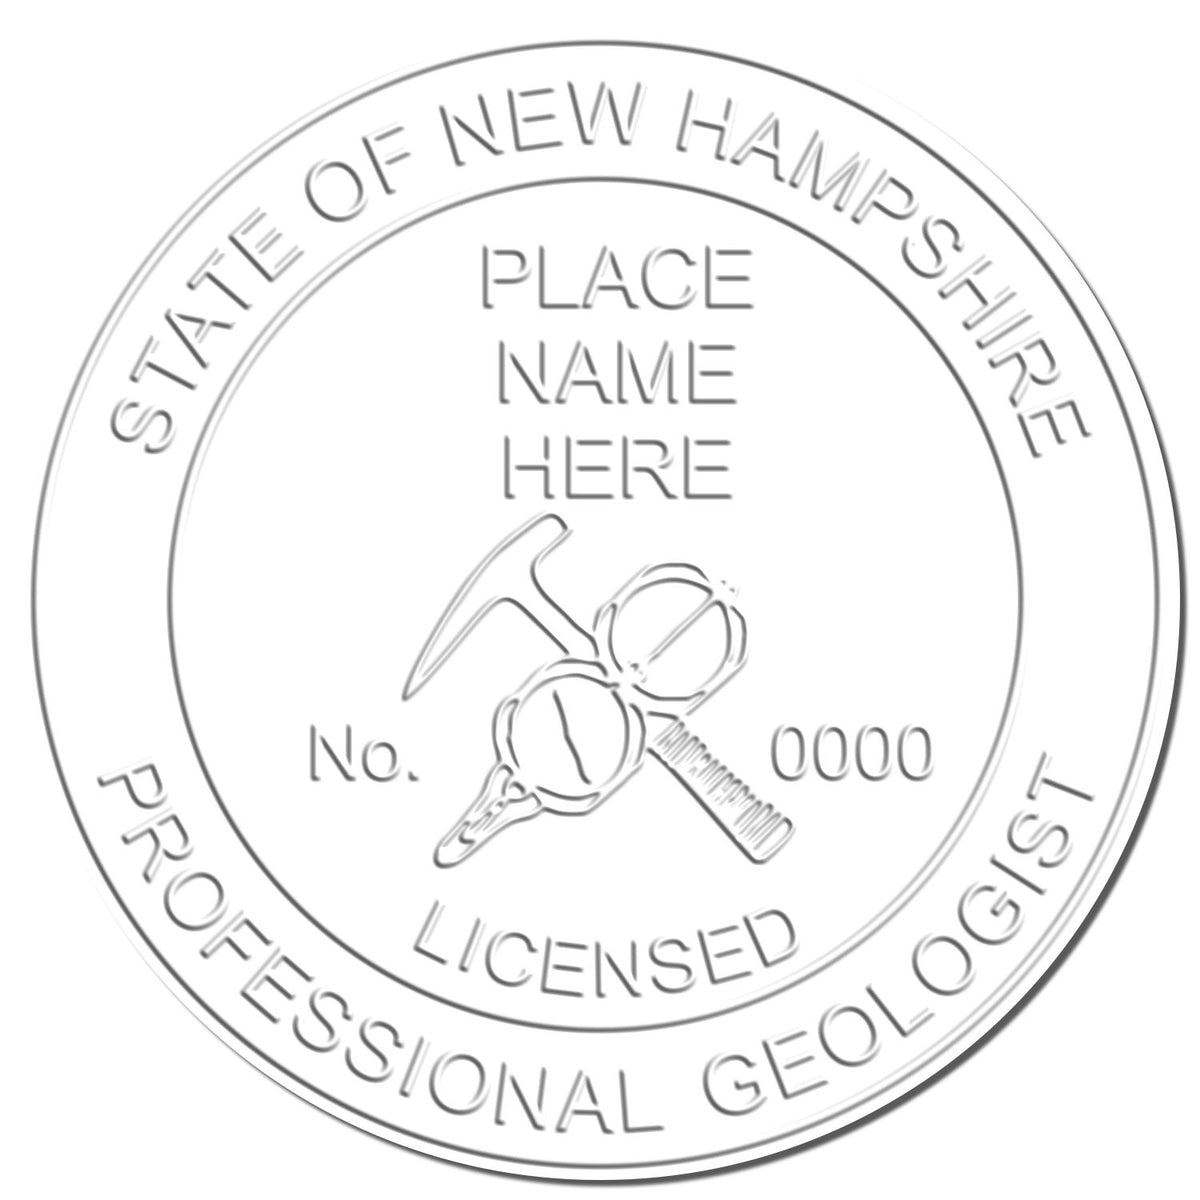 A photograph of the State of New Hampshire Extended Long Reach Geologist Seal stamp impression reveals a vivid, professional image of the on paper.